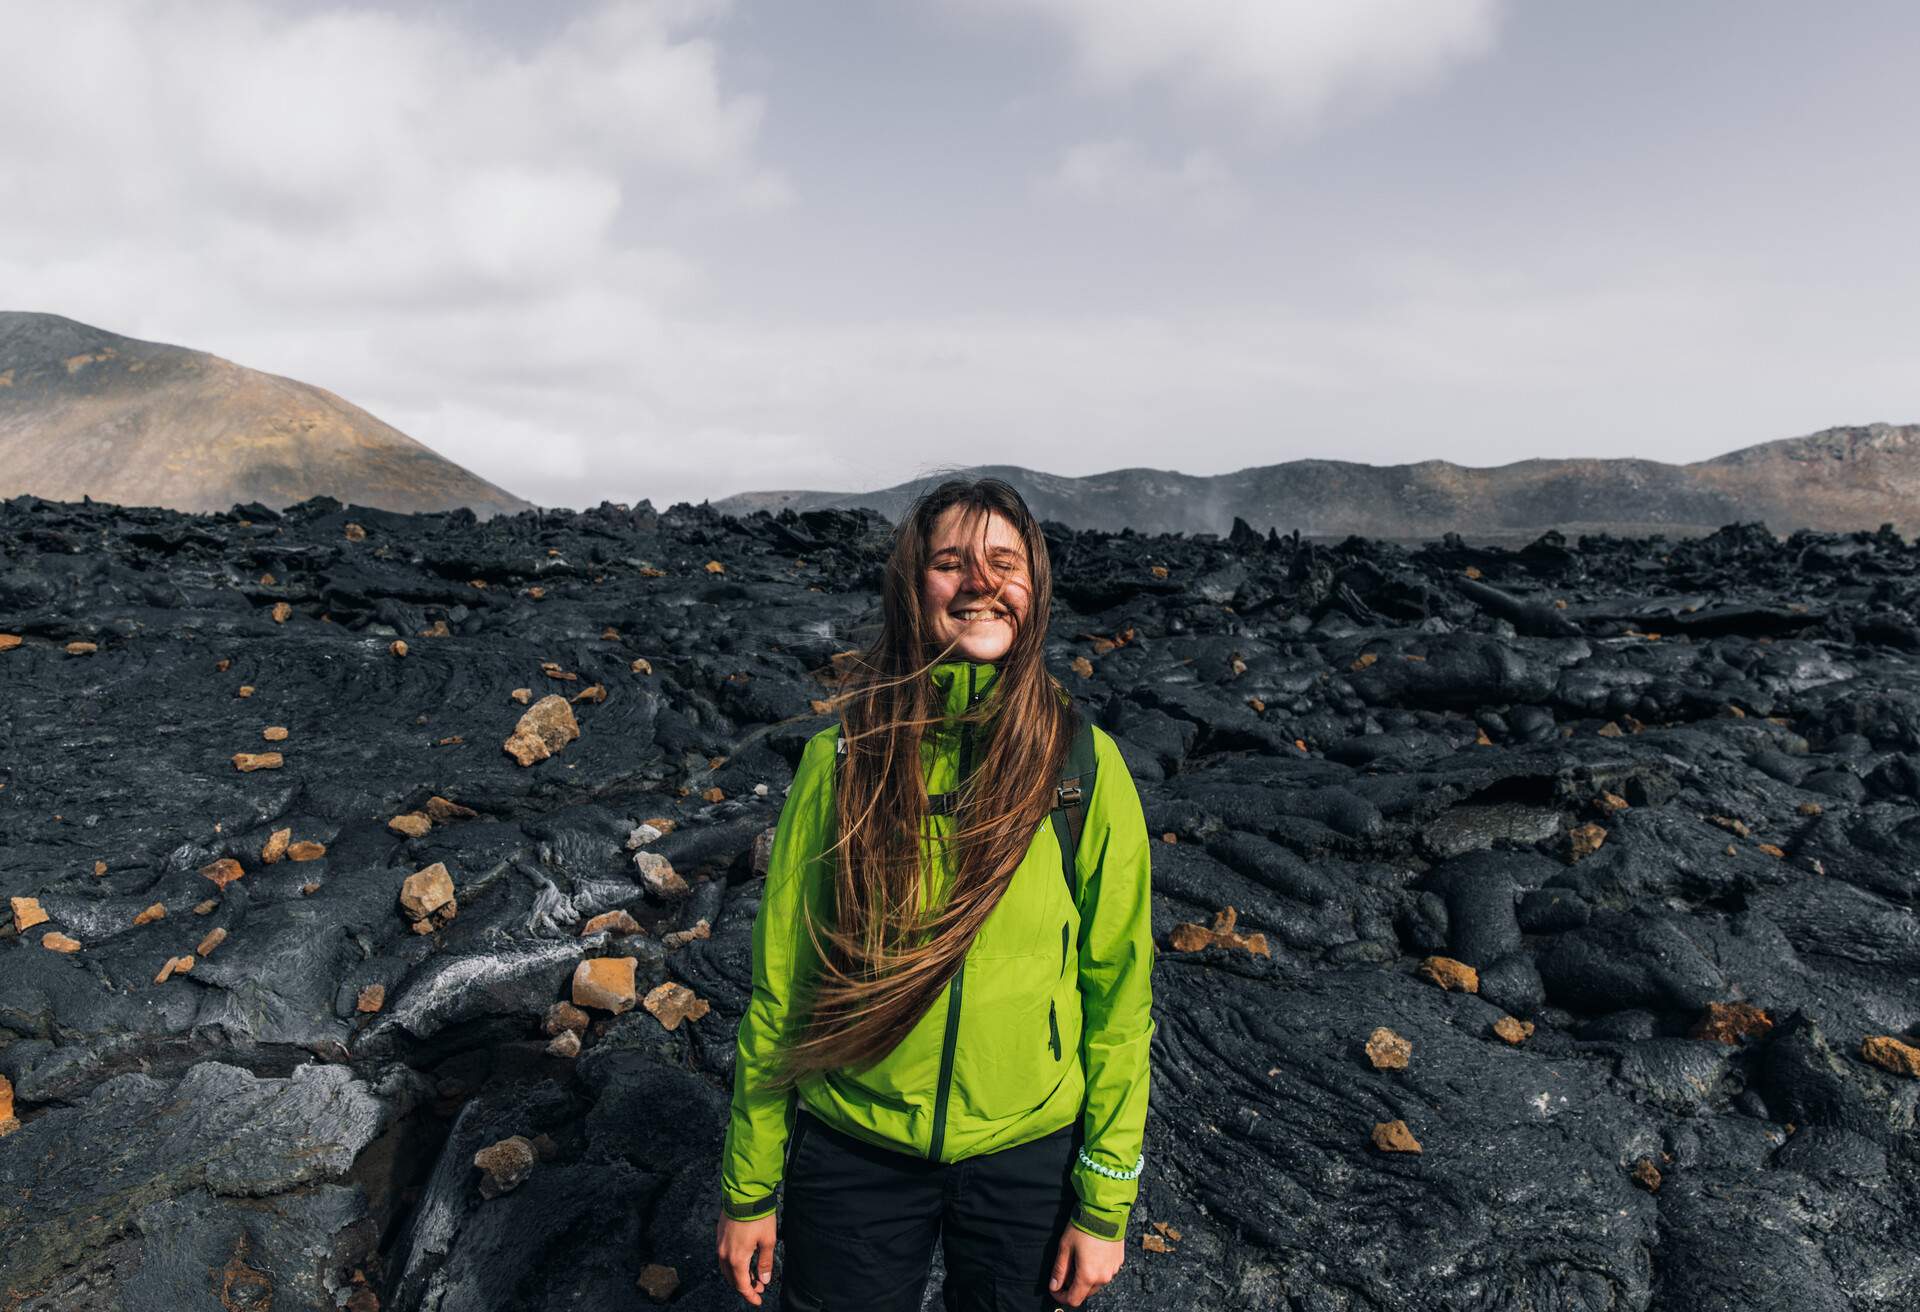 Young smiling woman explorer with long hair onin green jacket exploring the dramatic landscape of the new erupting volcano with the flame melting lava